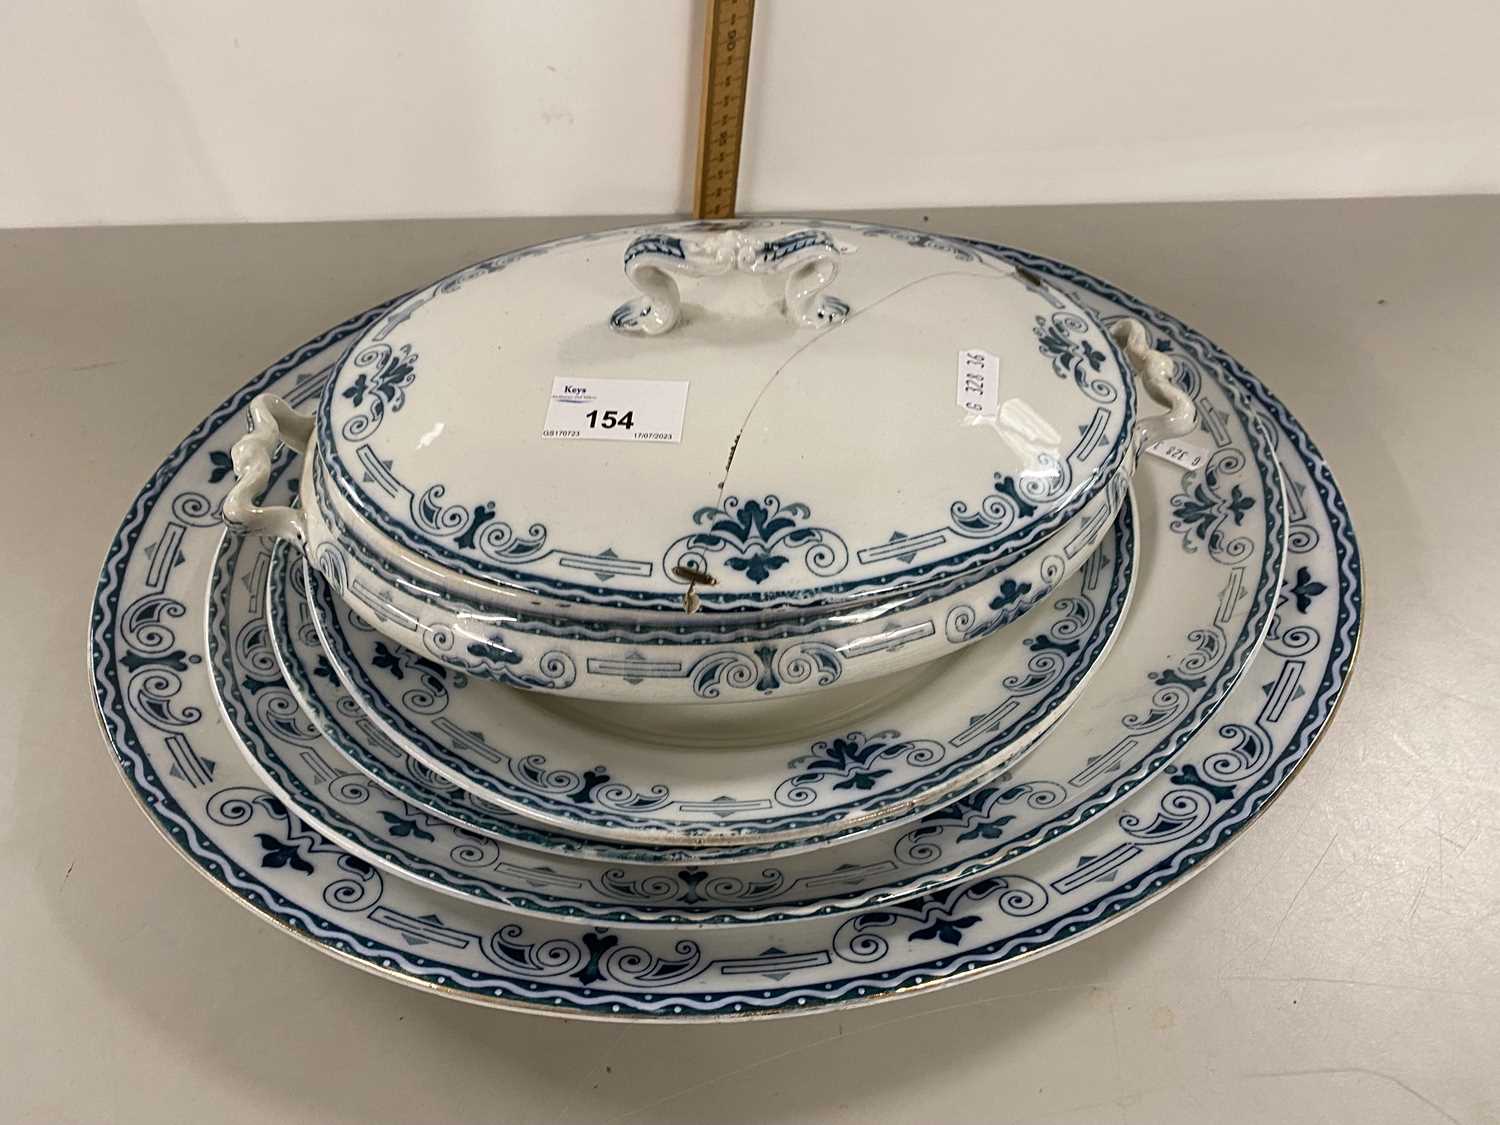 Quantity of Regal pattern meat plates and dinner wares